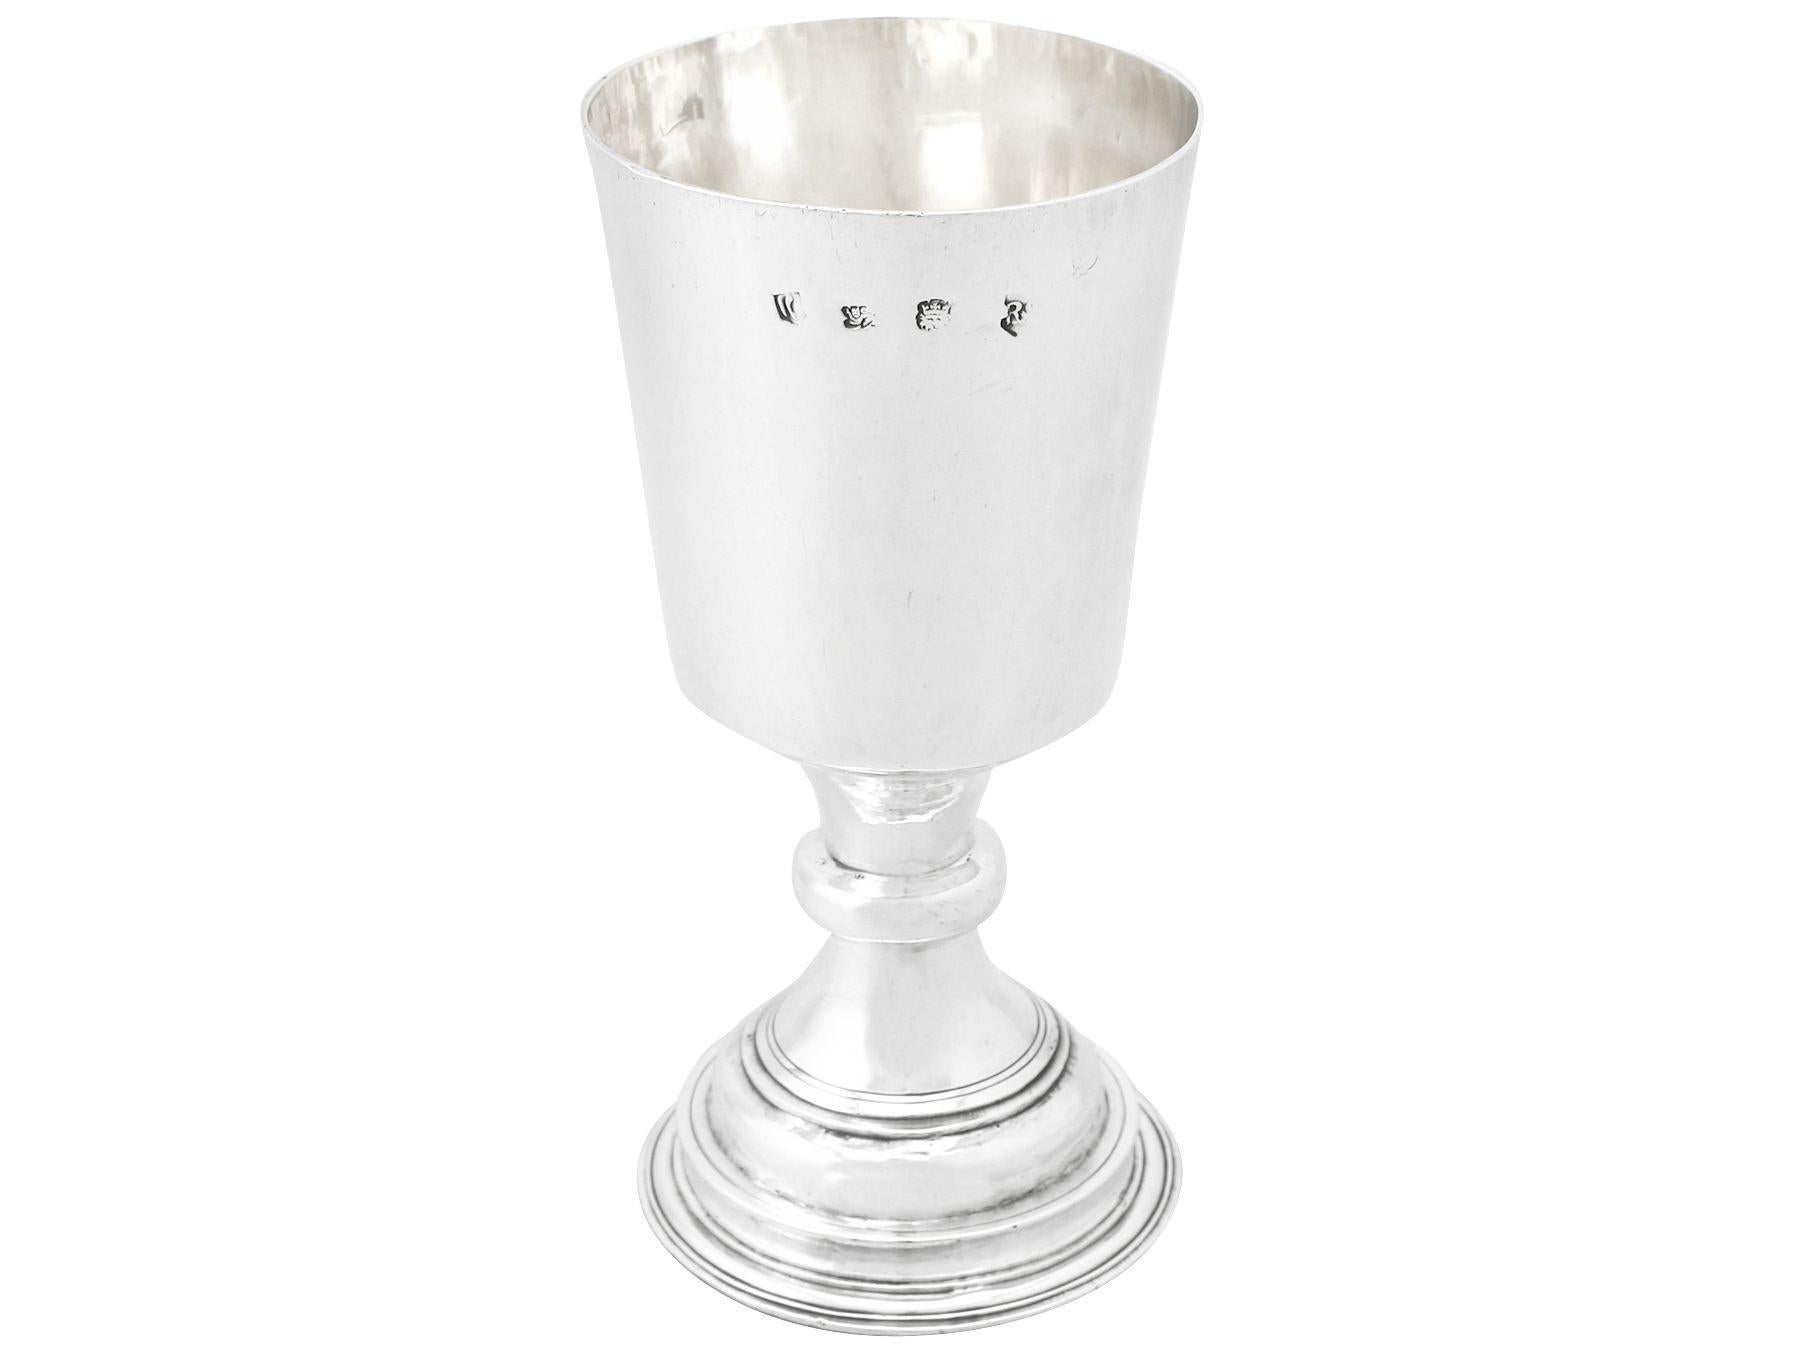 An exceptional, fine and impressive antique Charles I English sterling silver chalice; an addition to our collectable range of 17th century silverware.

This exceptional antique Charles I sterling silver chalice has a tapering cylindrical